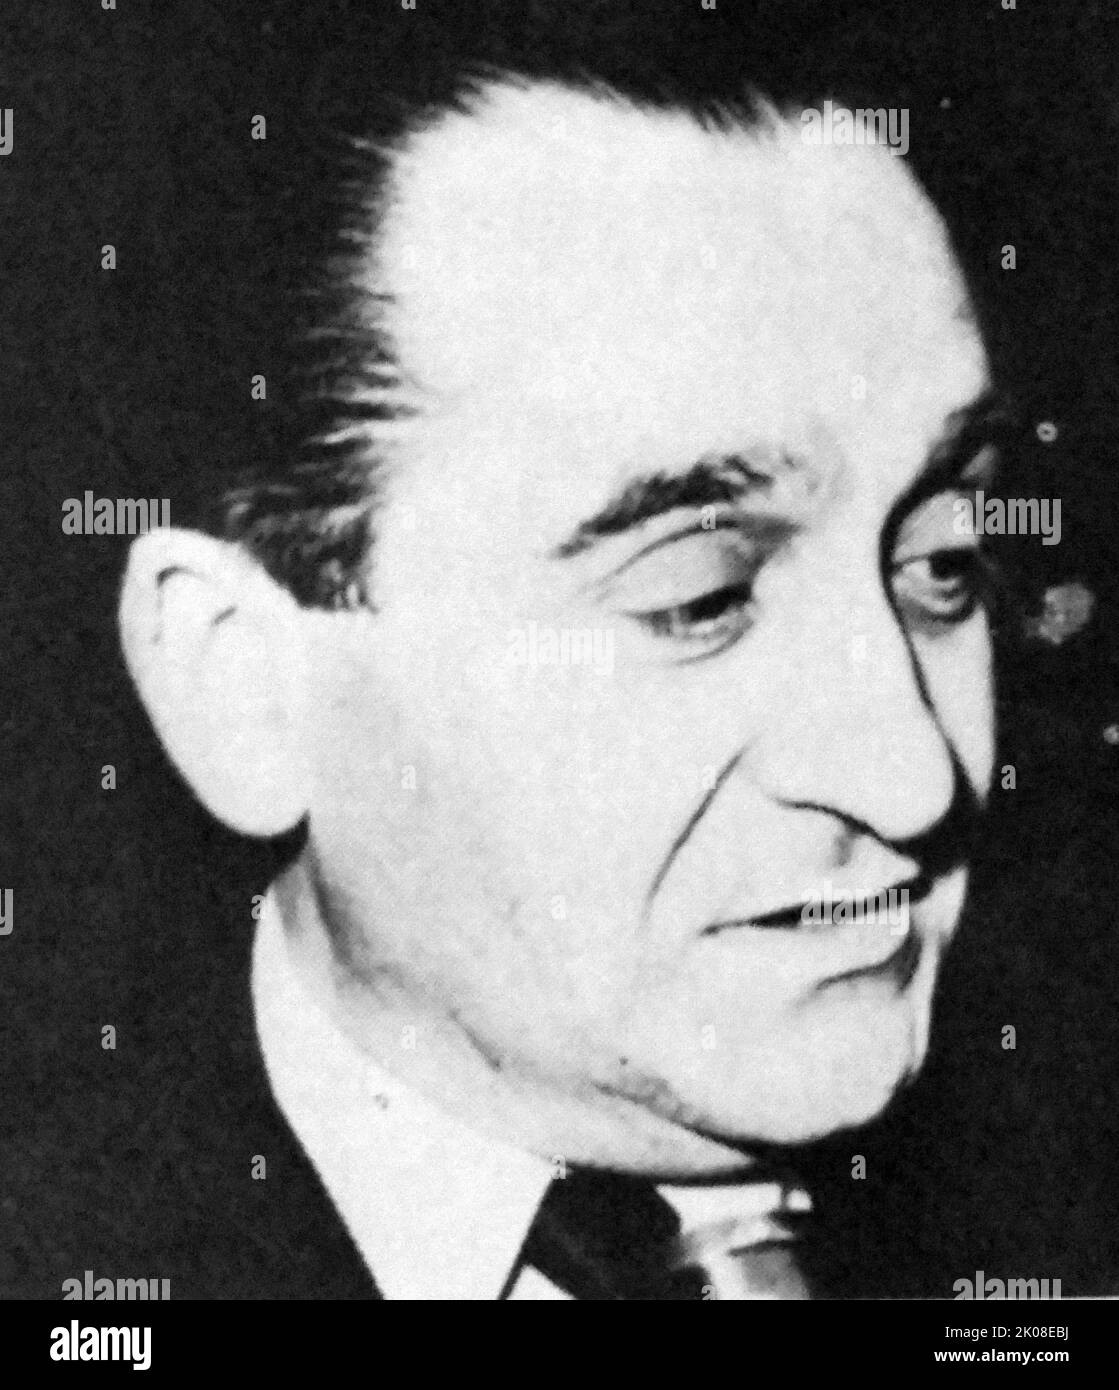 Pierre Isaac Isidore Mendes France (11 January 1907 - 18 October 1982), known as PMF, was a French politician who served as President of the Council of Ministers from 1954 to 1955 Stock Photo